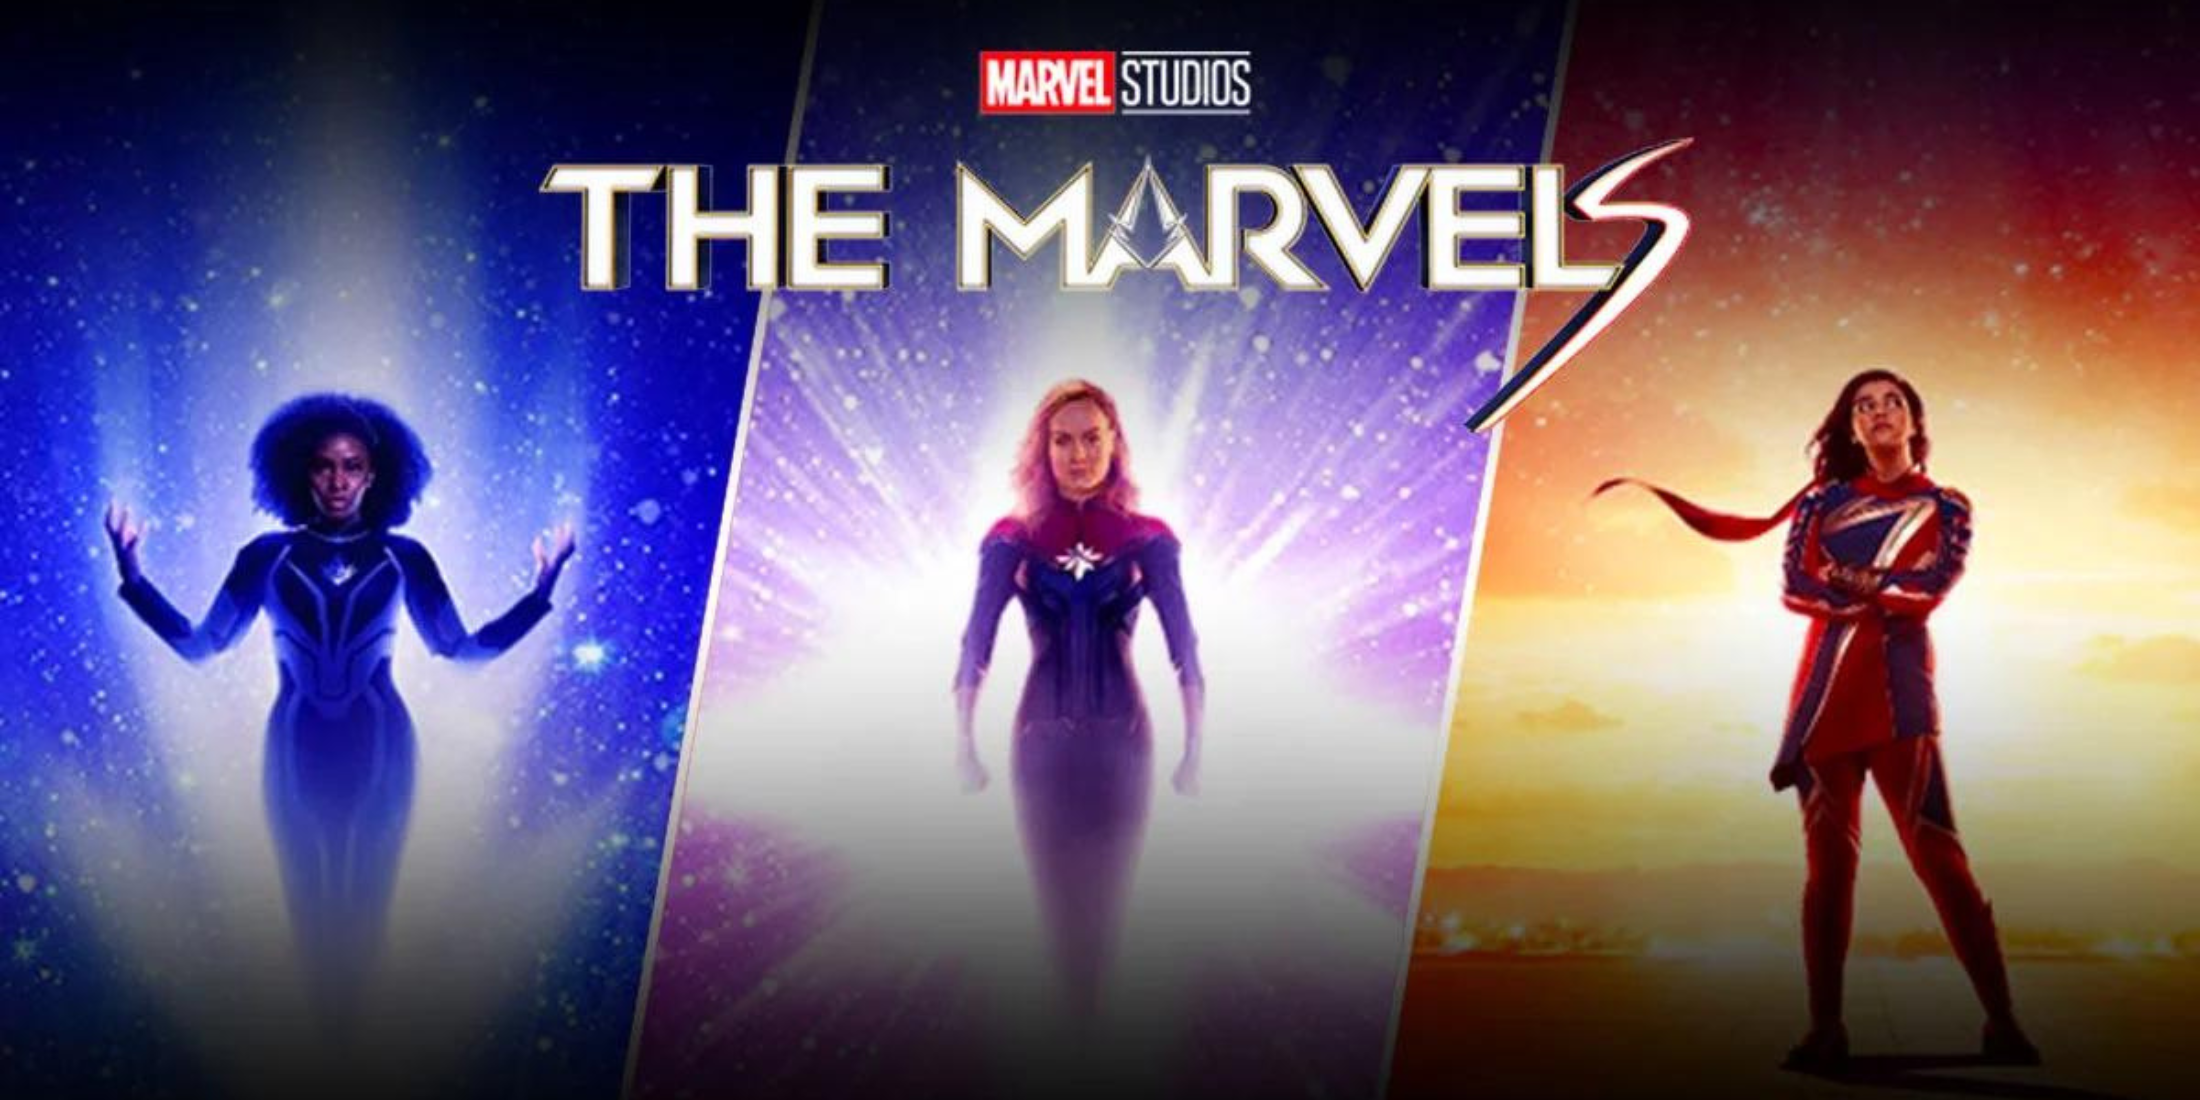 The Marvels Trailer Prepares Fans for A Marvel-ous Team-Up